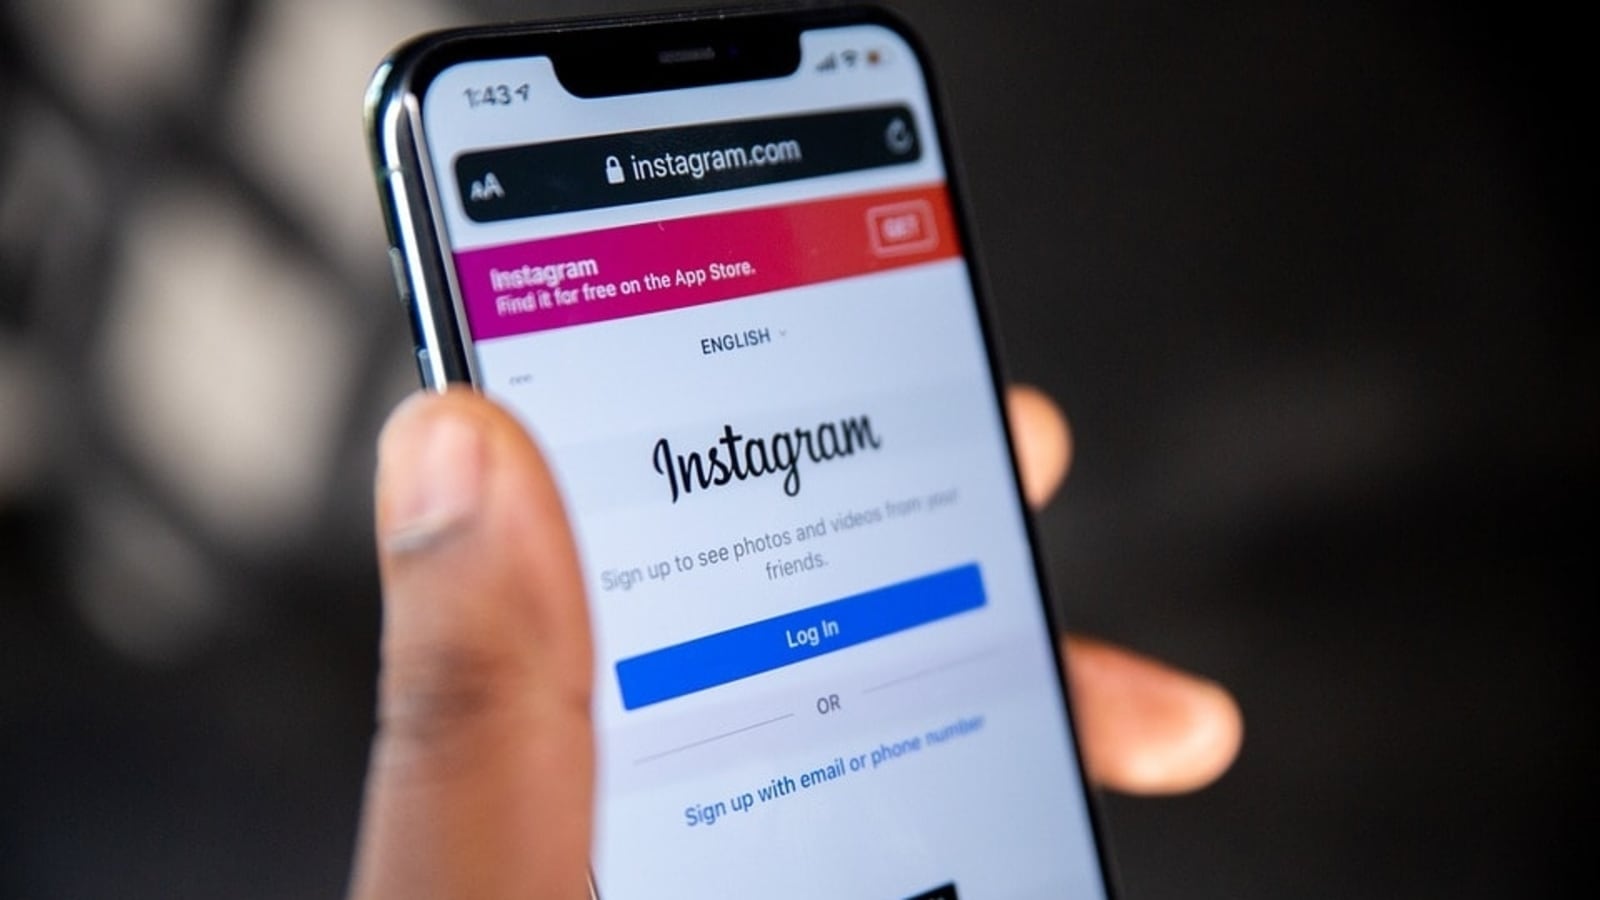 Instagram adds new Favorites and Following filters for the feed